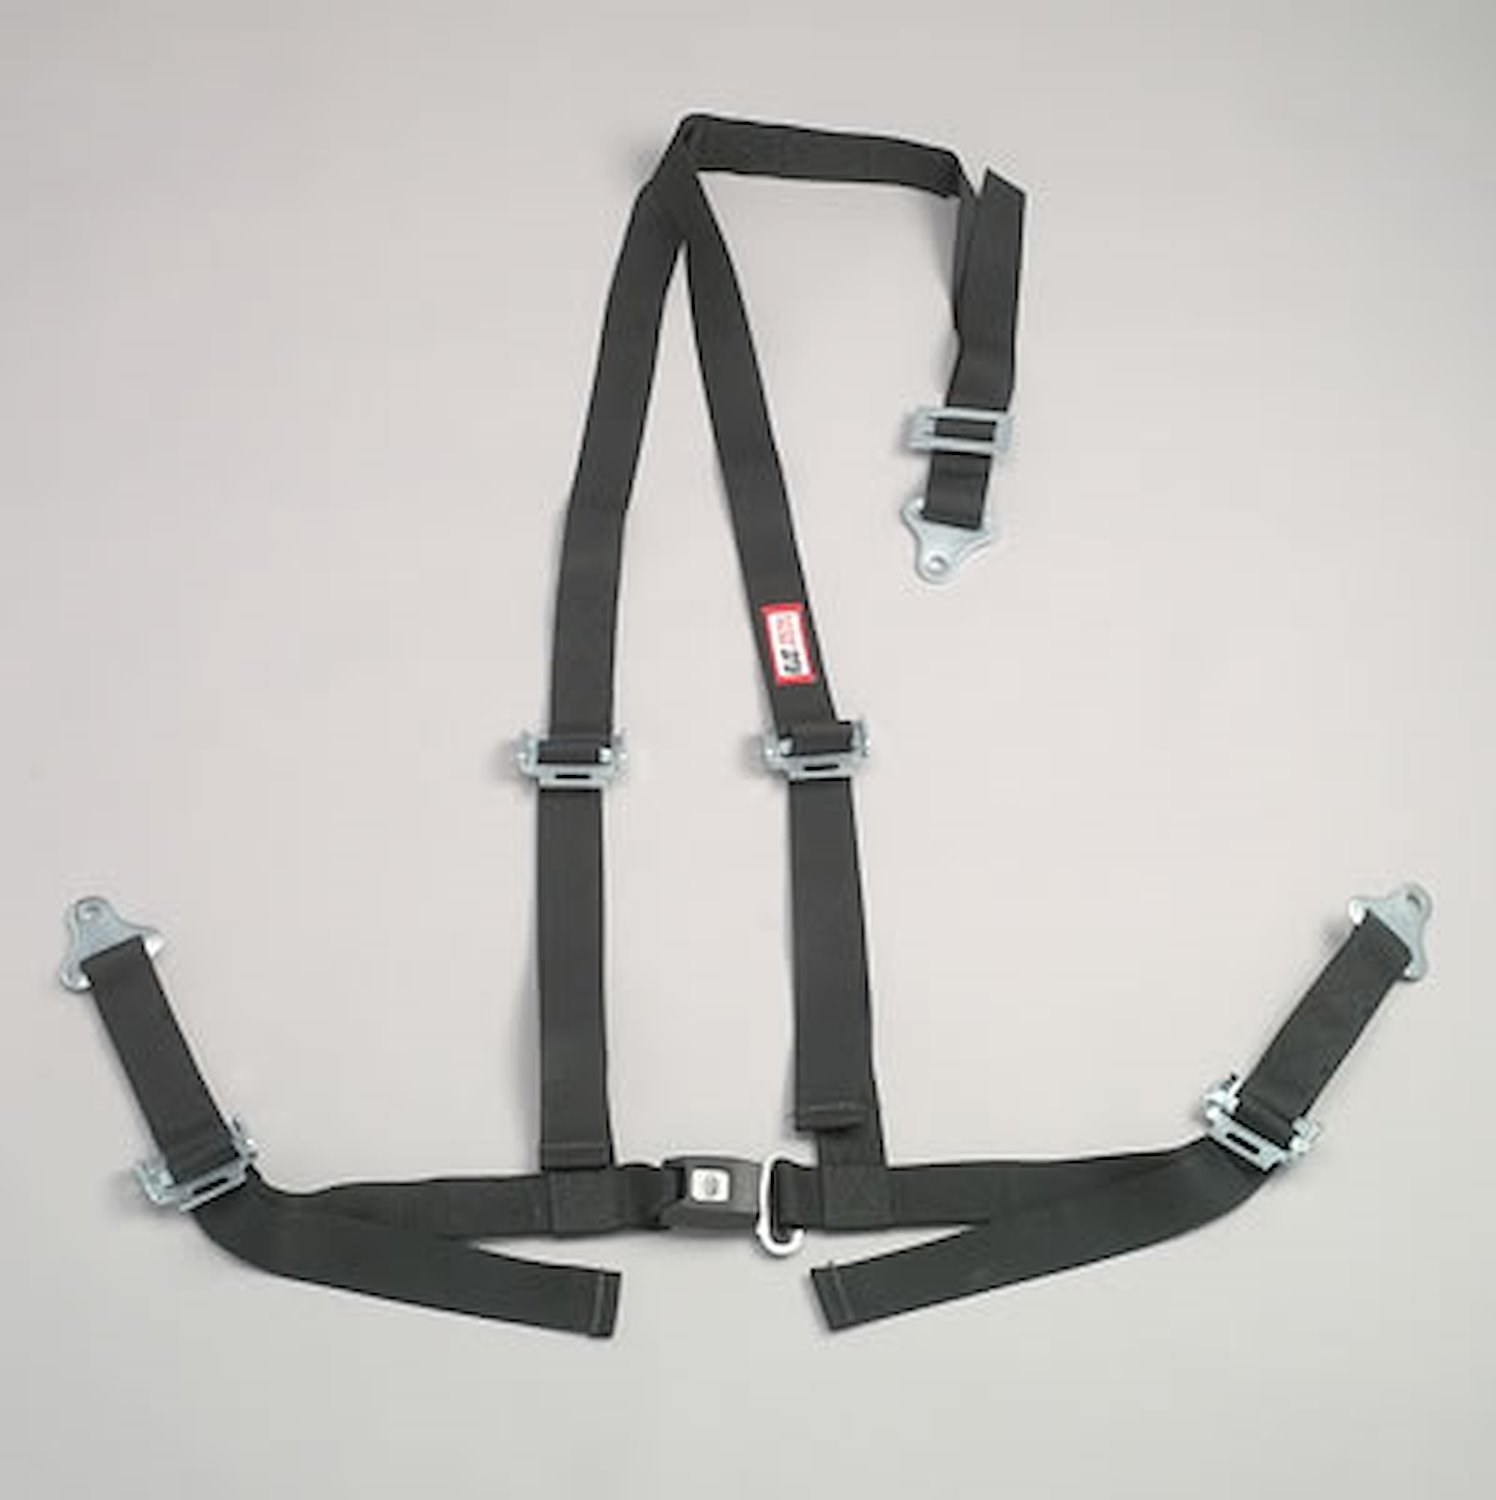 NON-SFI B&T HARNESS 2 PULL UP Lap Belt 2 S. H. Individual ROLL BAR Mount ALL WRAP ENDS w/STERNUM STRAP KHAKI